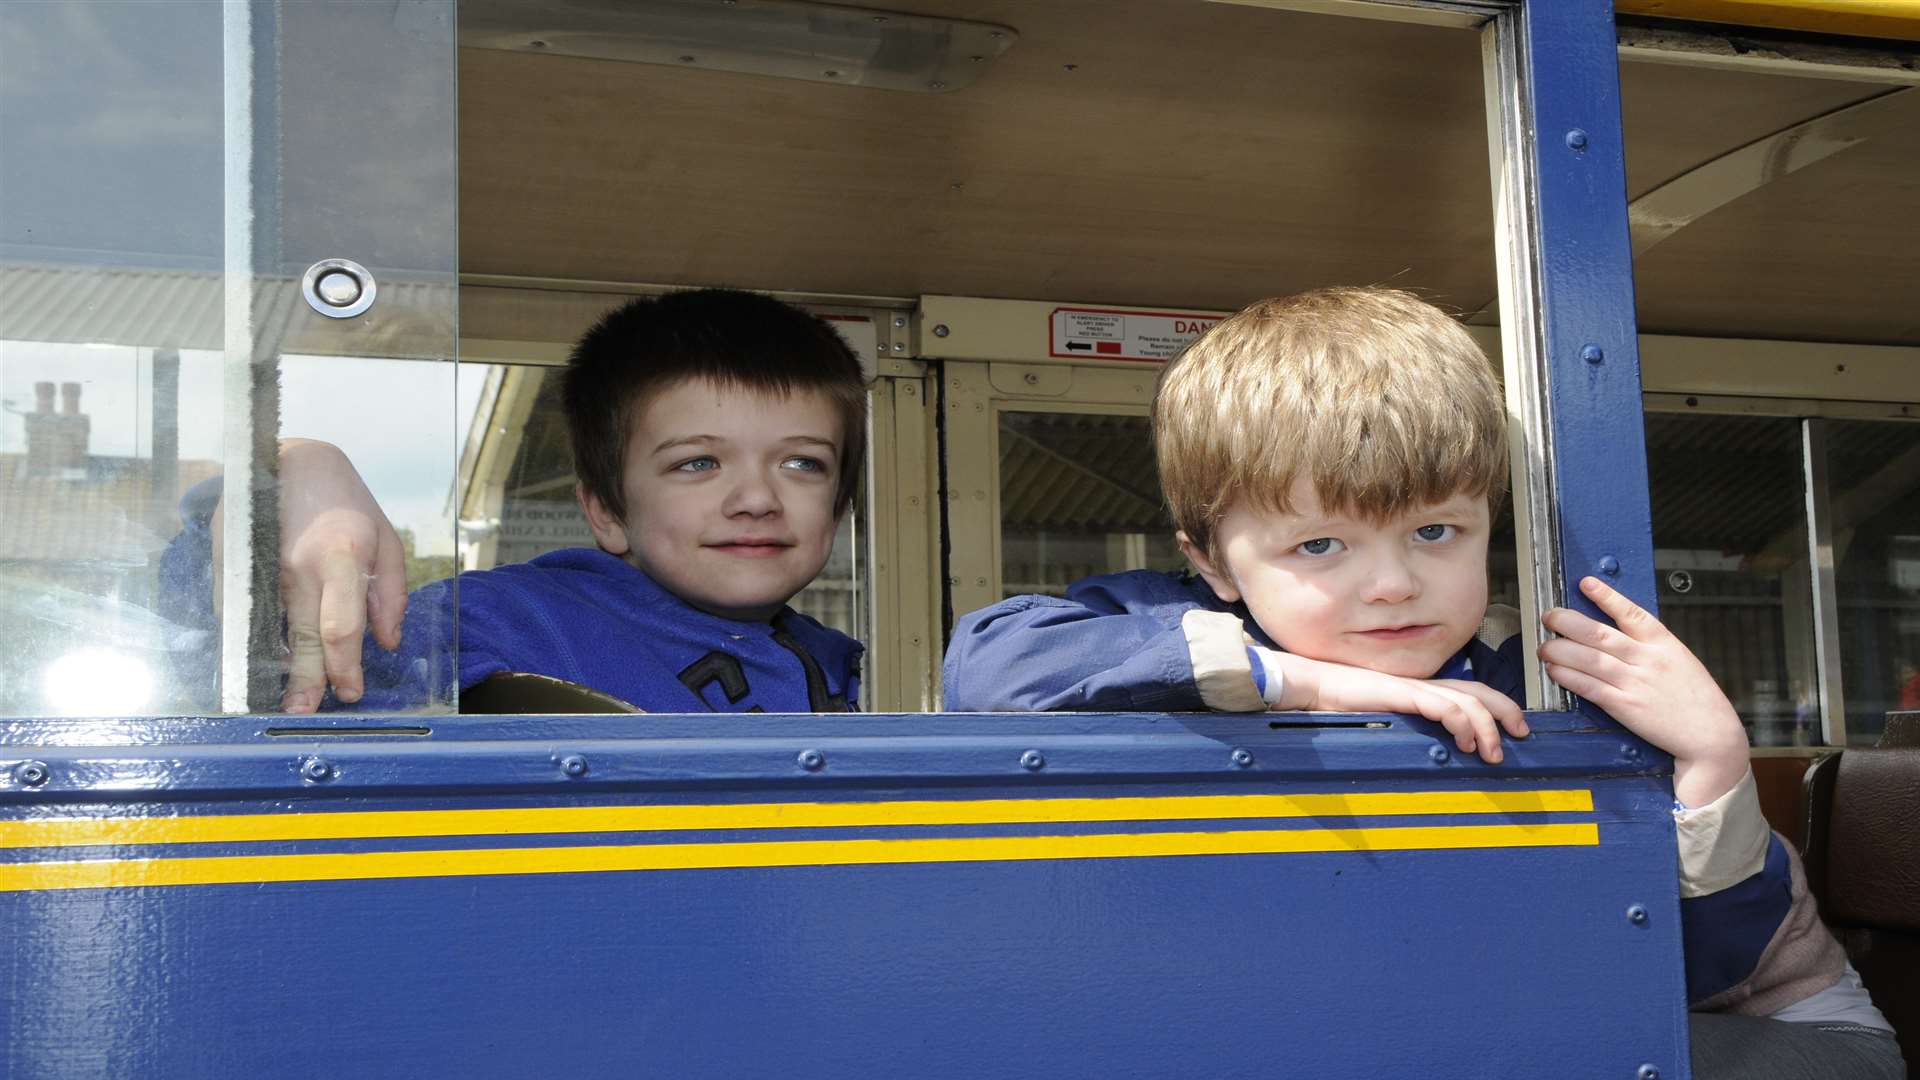 Romney, Hythe and Dymchurch Railway is one of those attractions taking part in the Big Weekend.